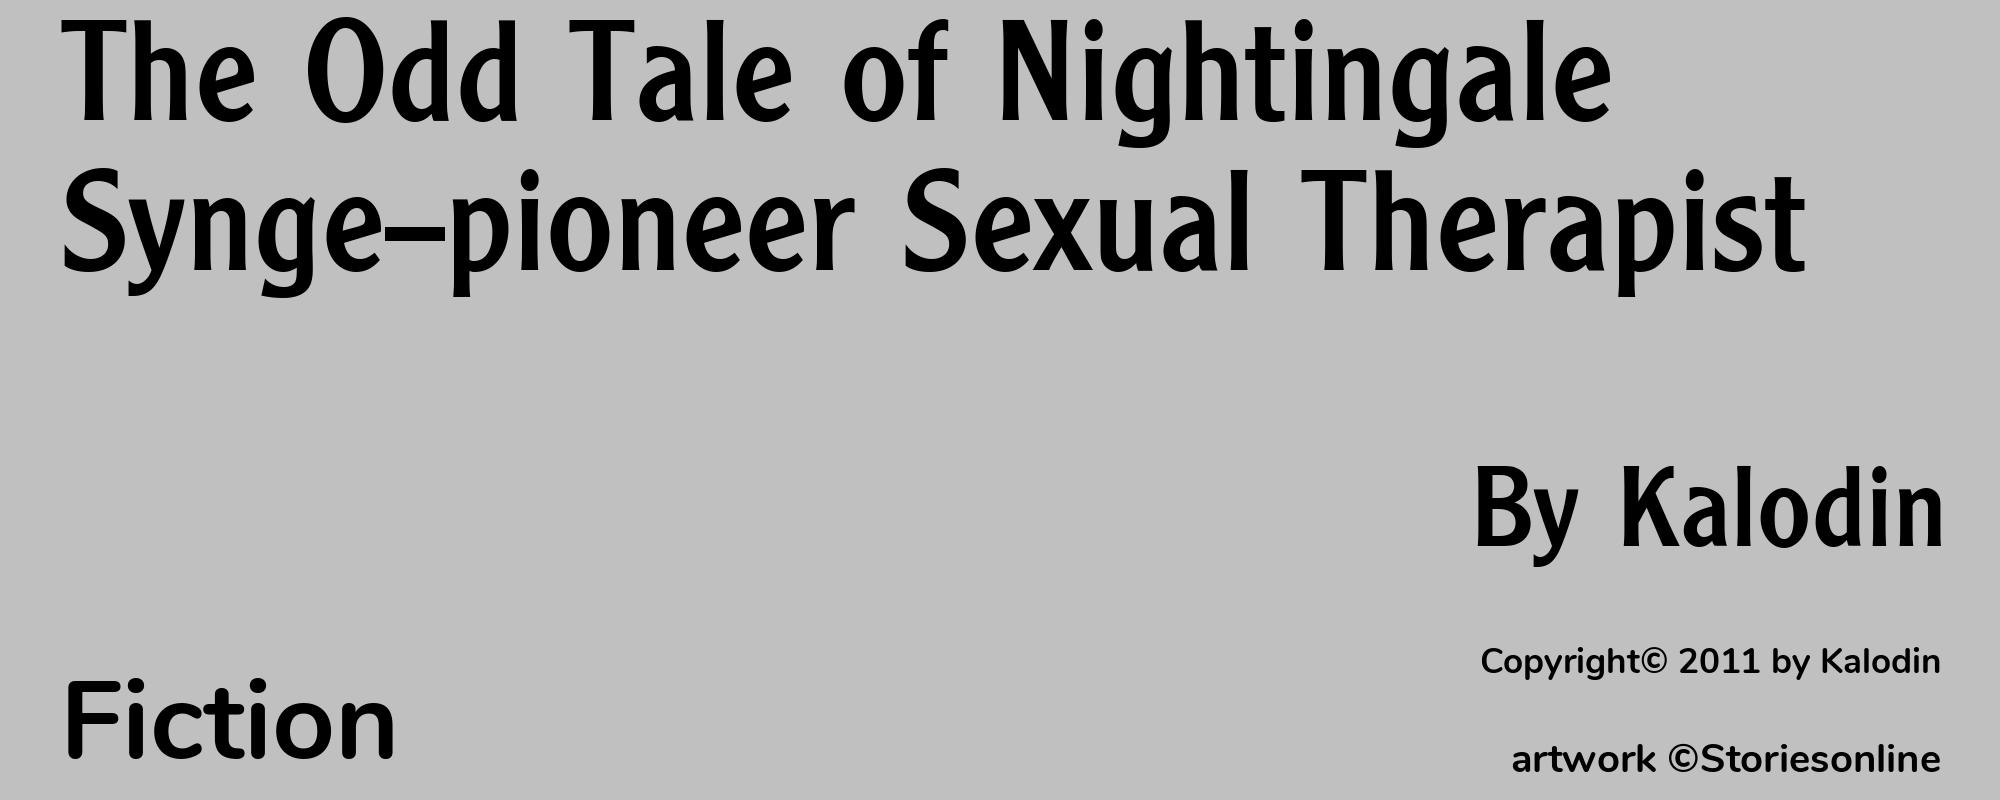 The Odd Tale of Nightingale Synge--pioneer Sexual Therapist - Cover